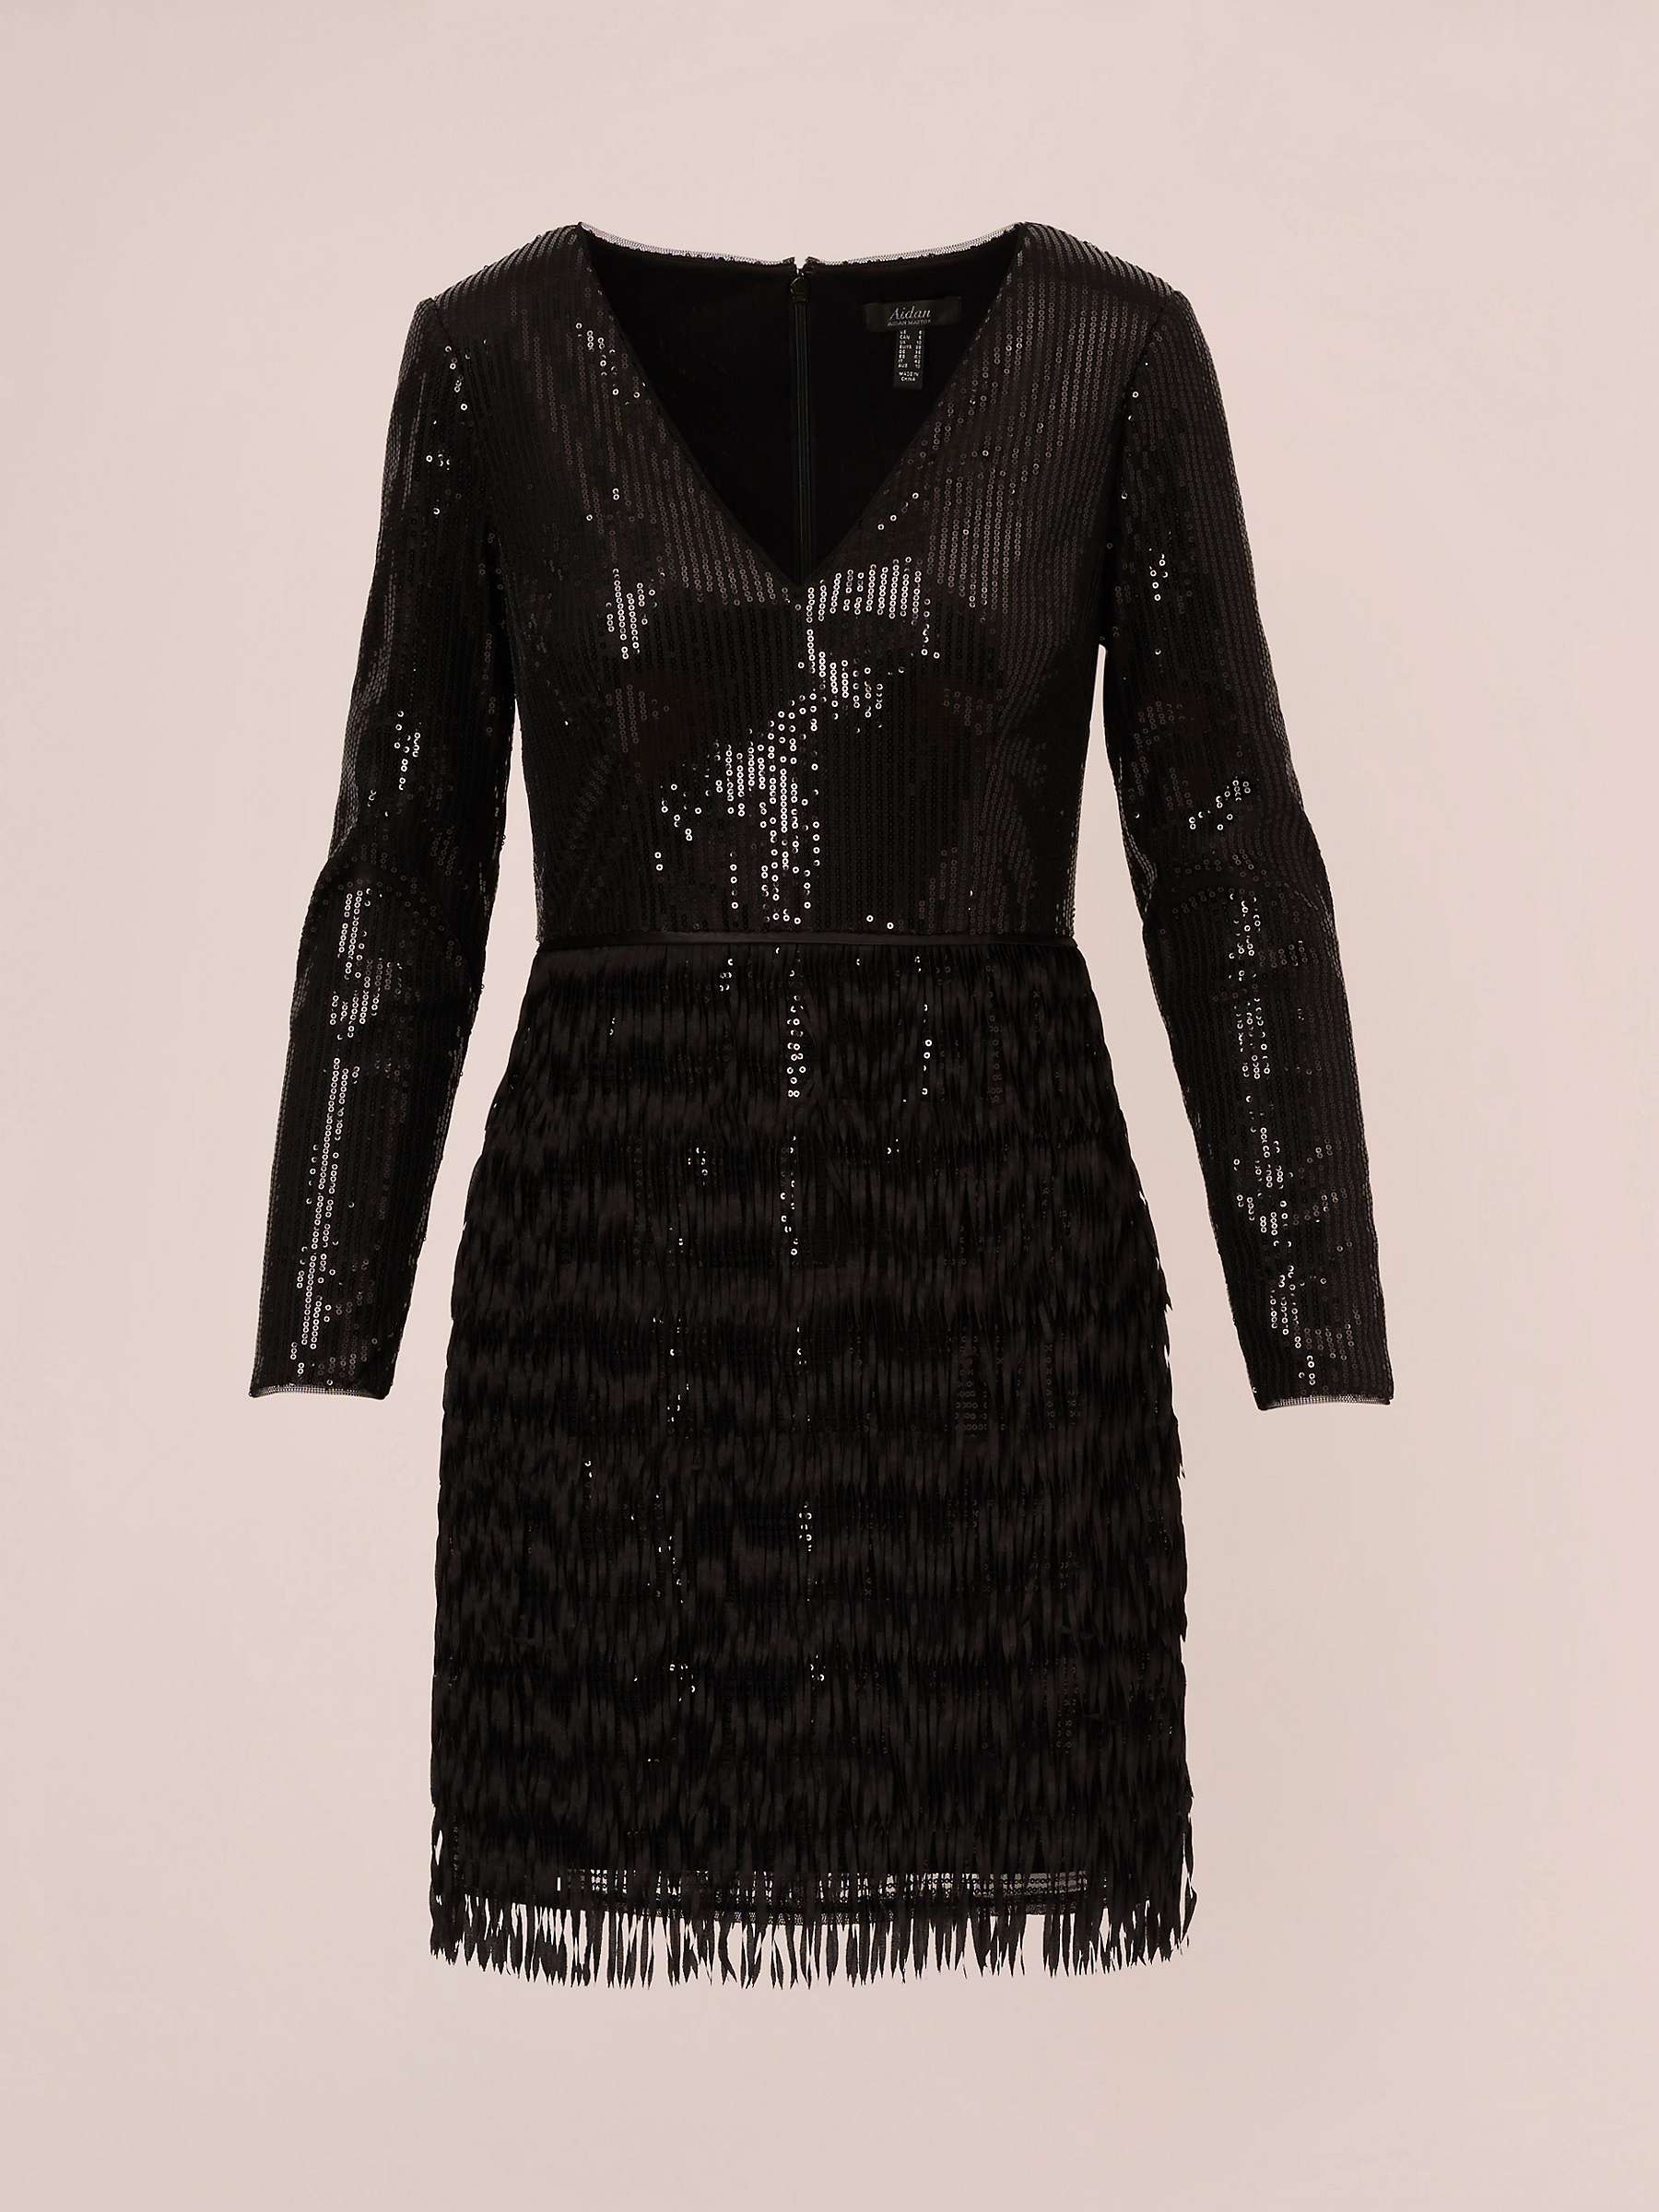 Buy Aidan by Adrianna Papell Sequin Mini Cocktail Dress, Black Online at johnlewis.com